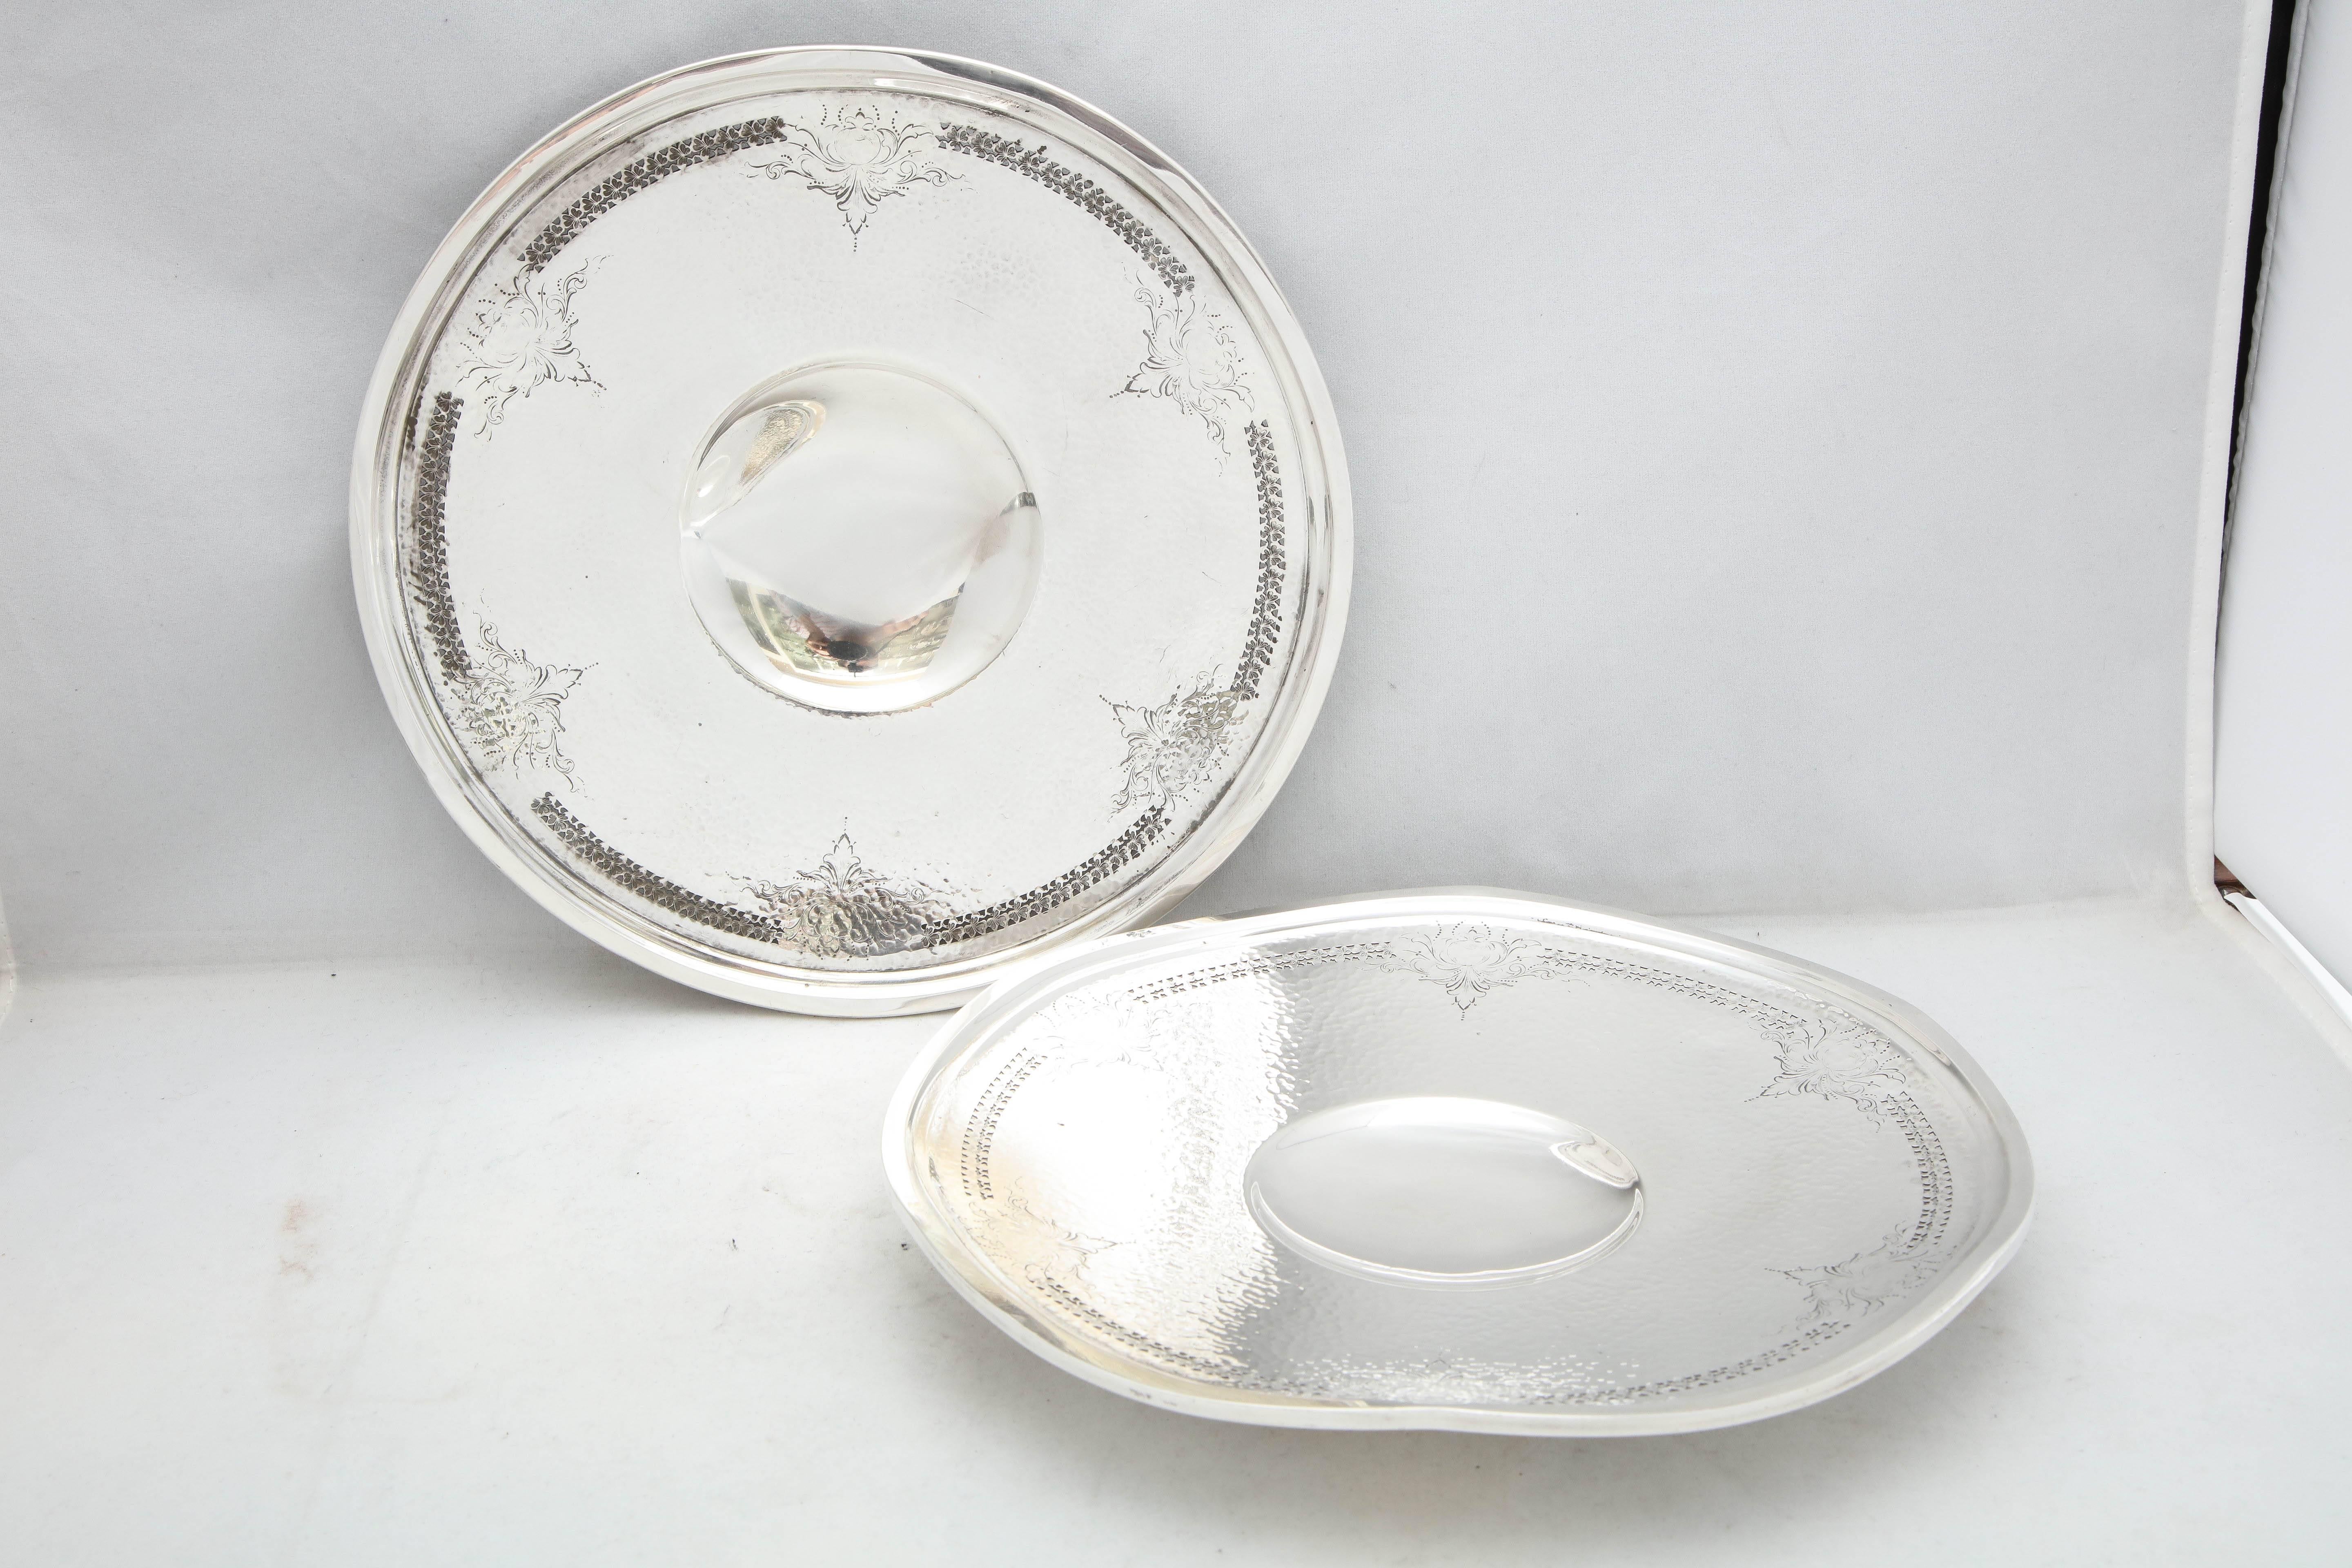 Pair of Art Deco, sterling silver, hand-hammered, pedestal based serving platters, The Webster Corp., No. Attleboro, Mass, circa 1920's-1930's. Design is hand-hammered and has etched and pierced work around borders. Edge if each platter is wavy as